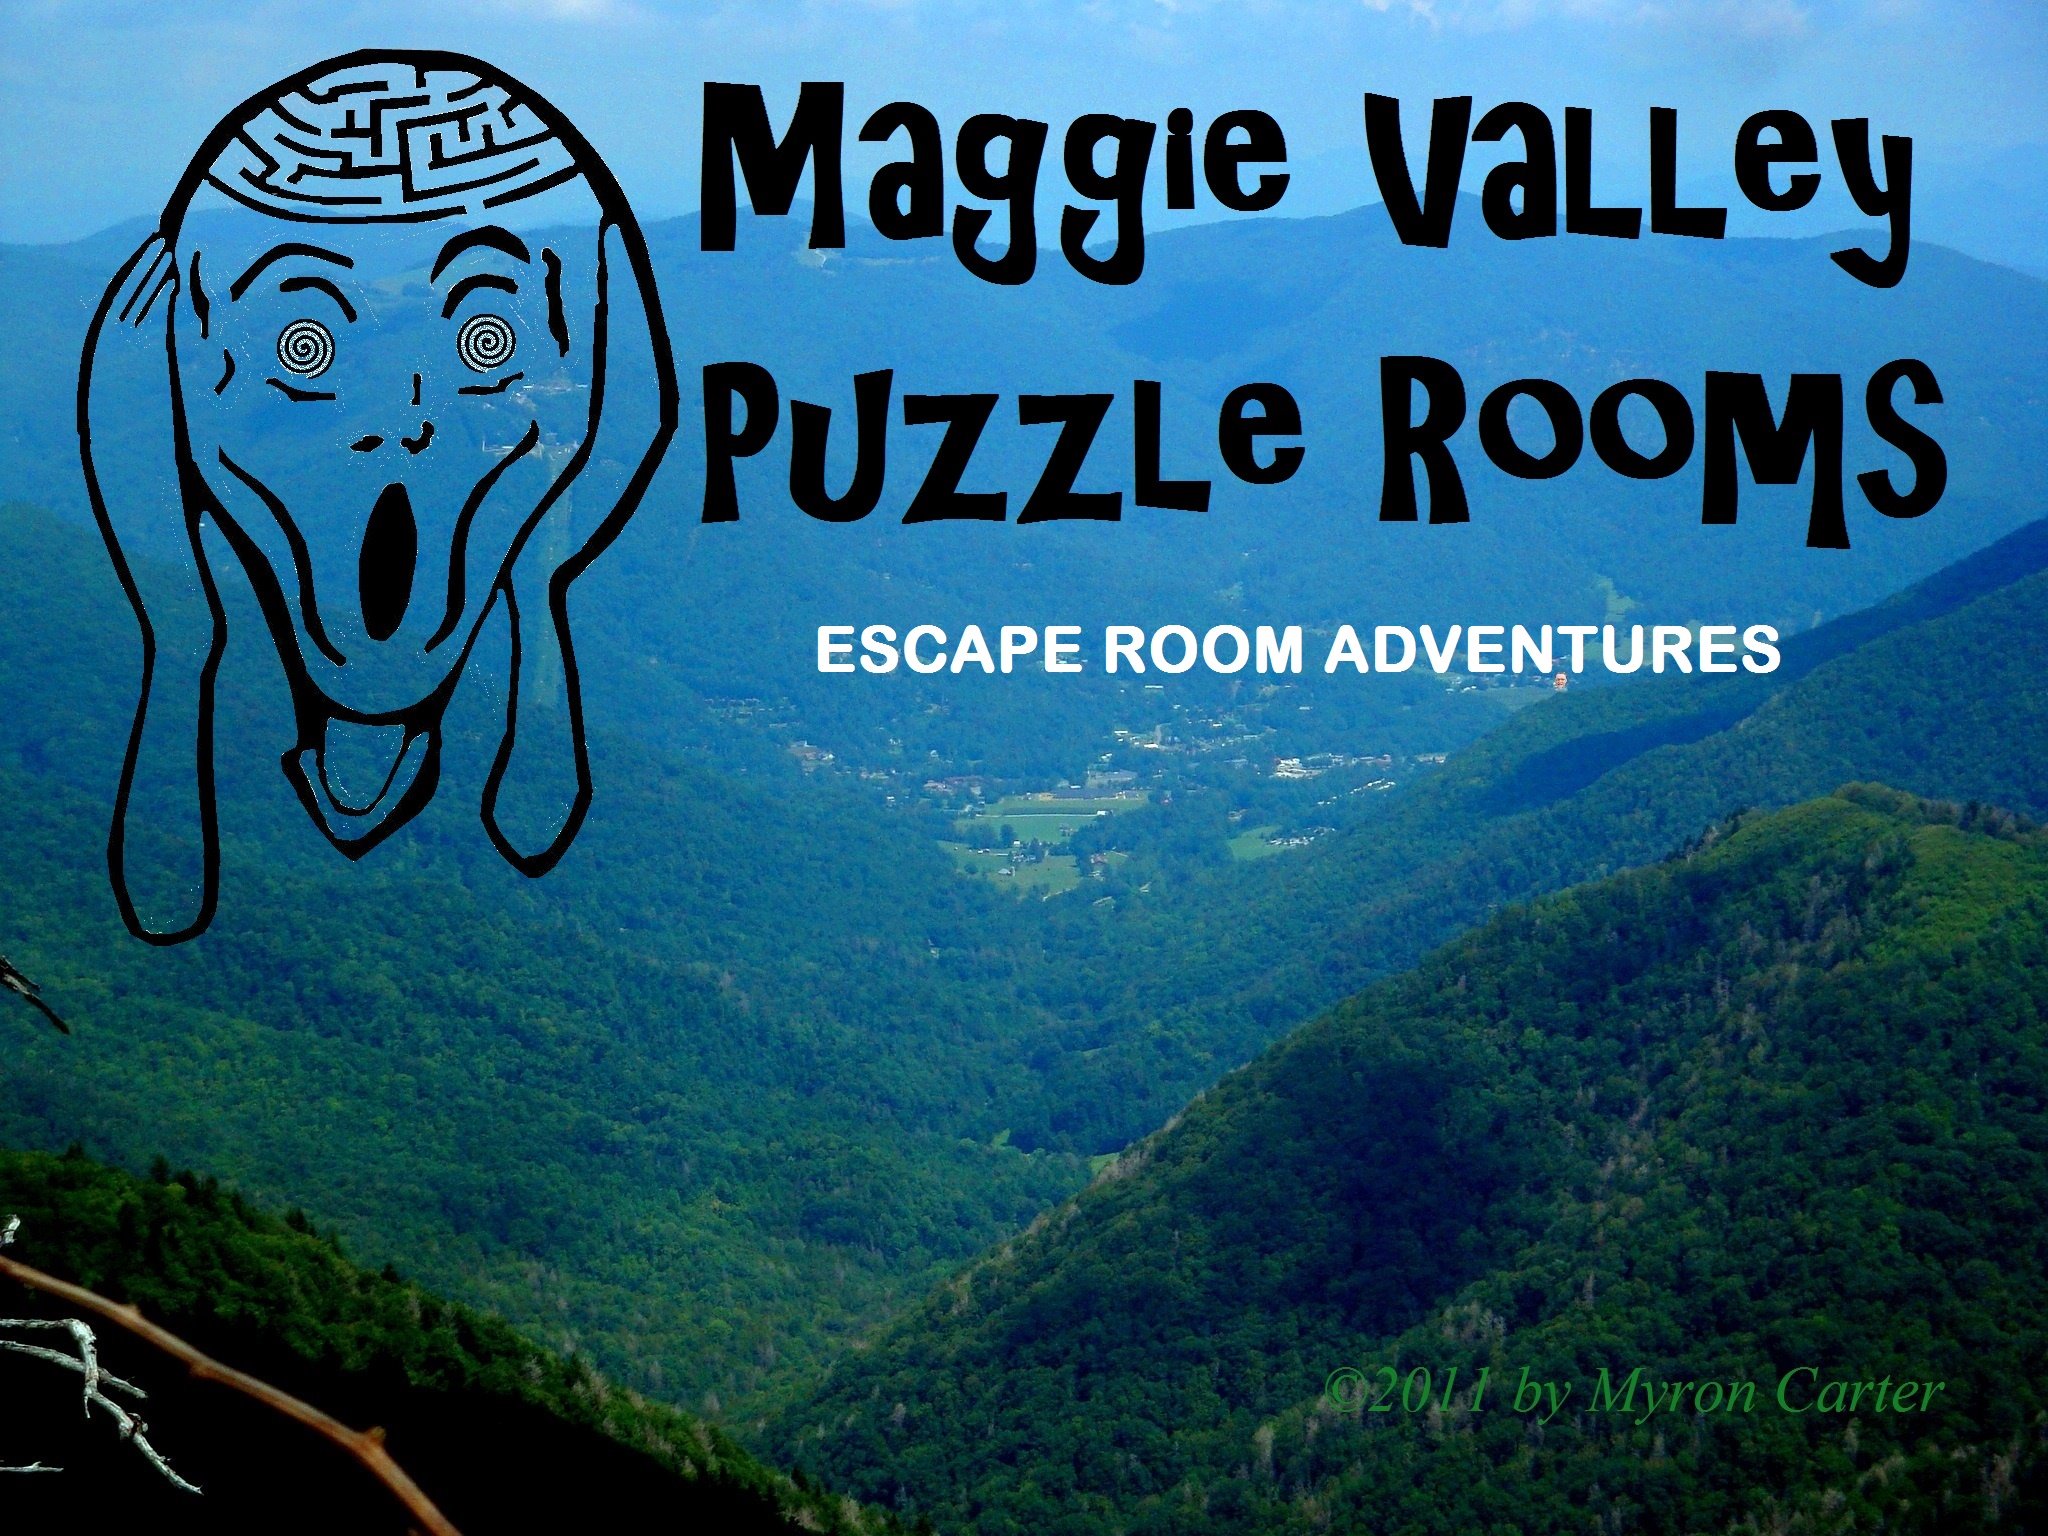 Maggie Valley Puzzle Rooms